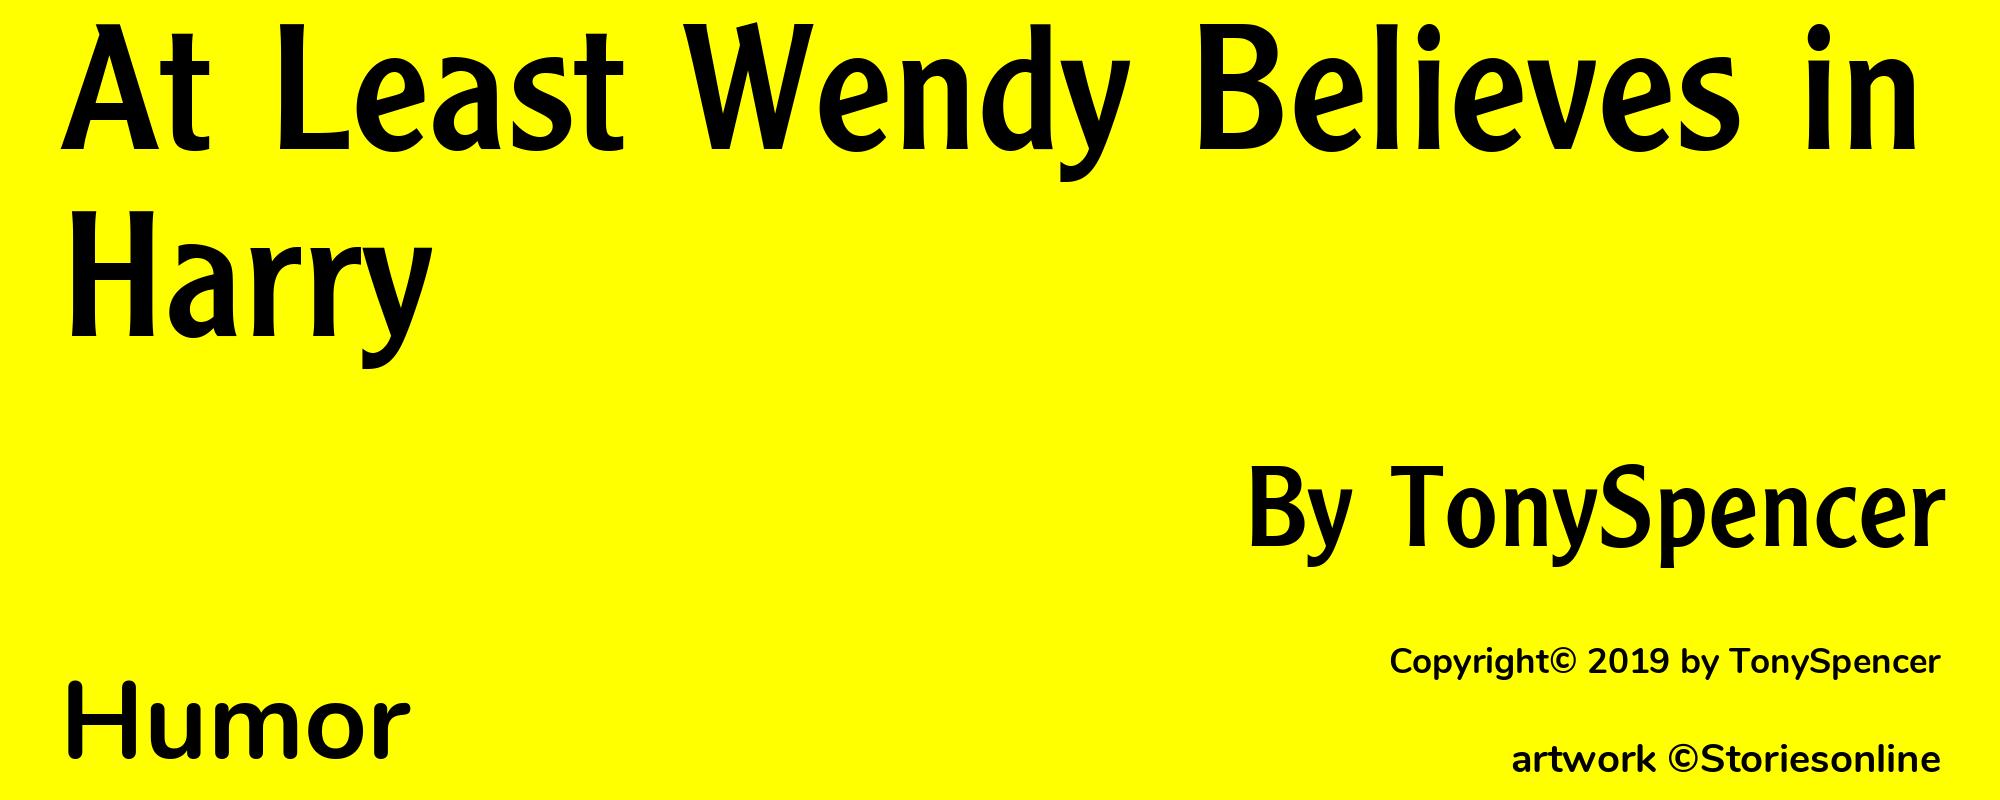 At Least Wendy Believes in Harry - Cover